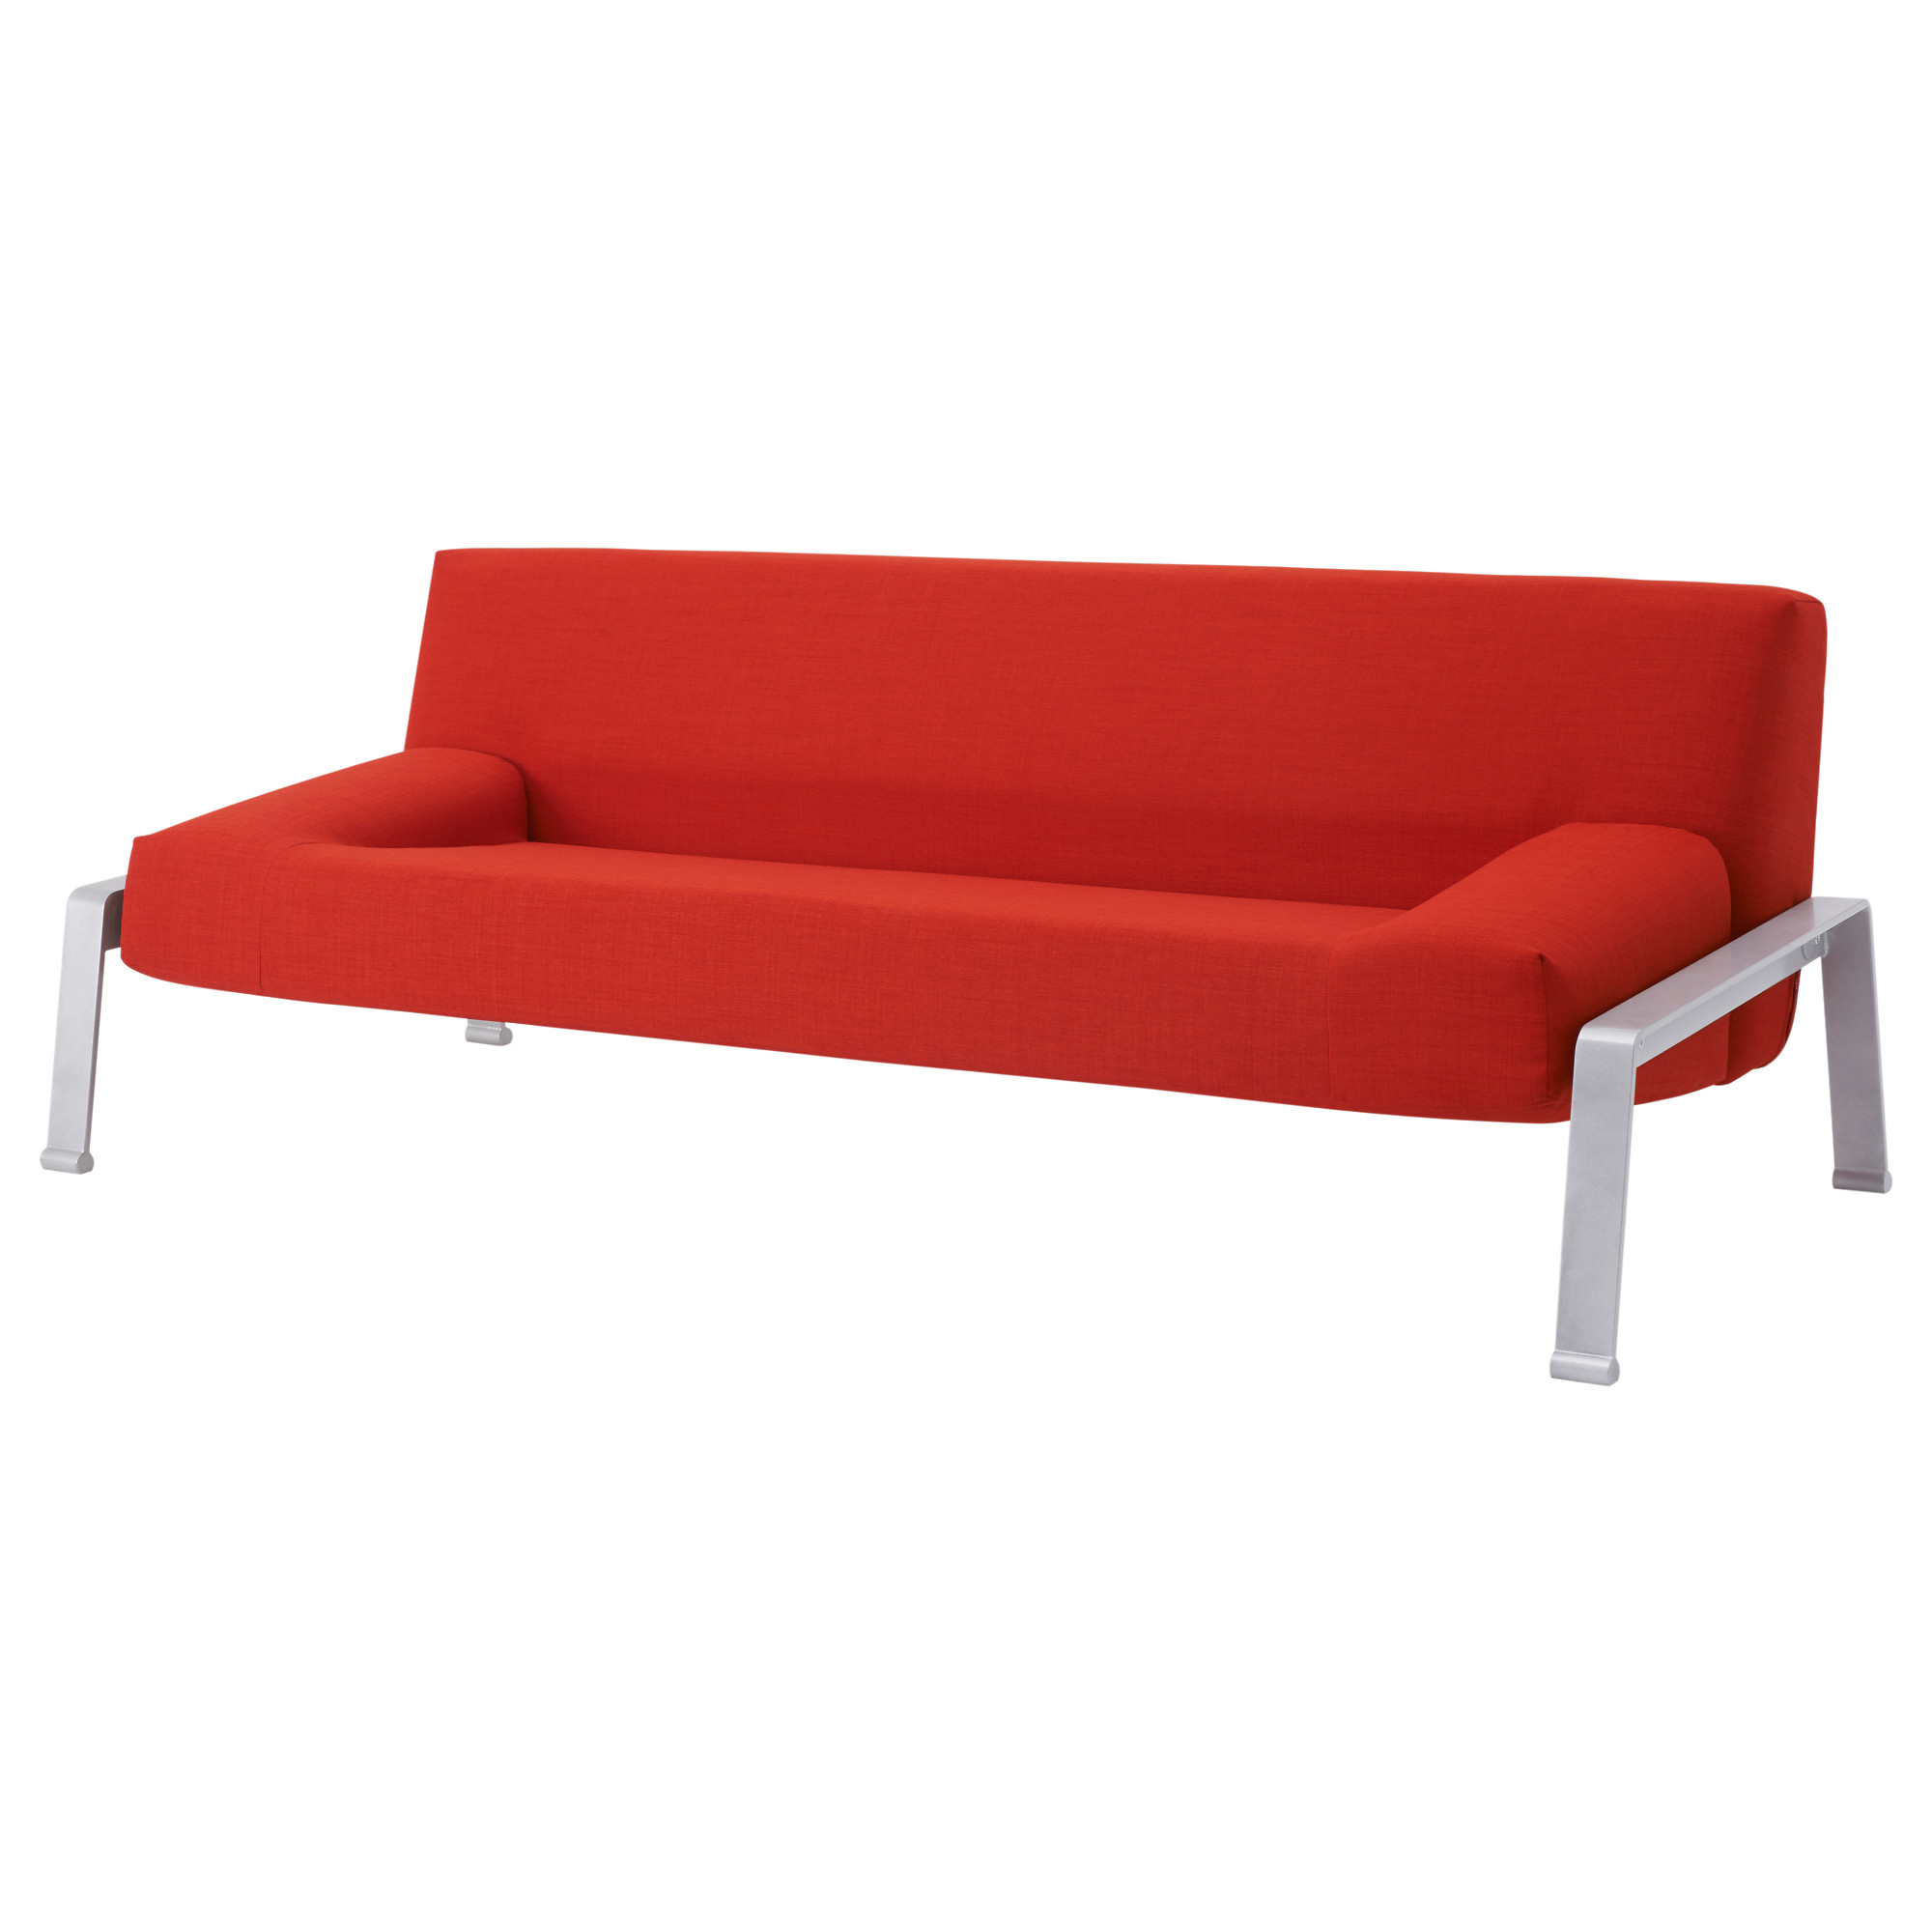 Alinea Canape D Angle Nouveau sofas Sleeper sofas Ikea that Great for A Quick Snooze